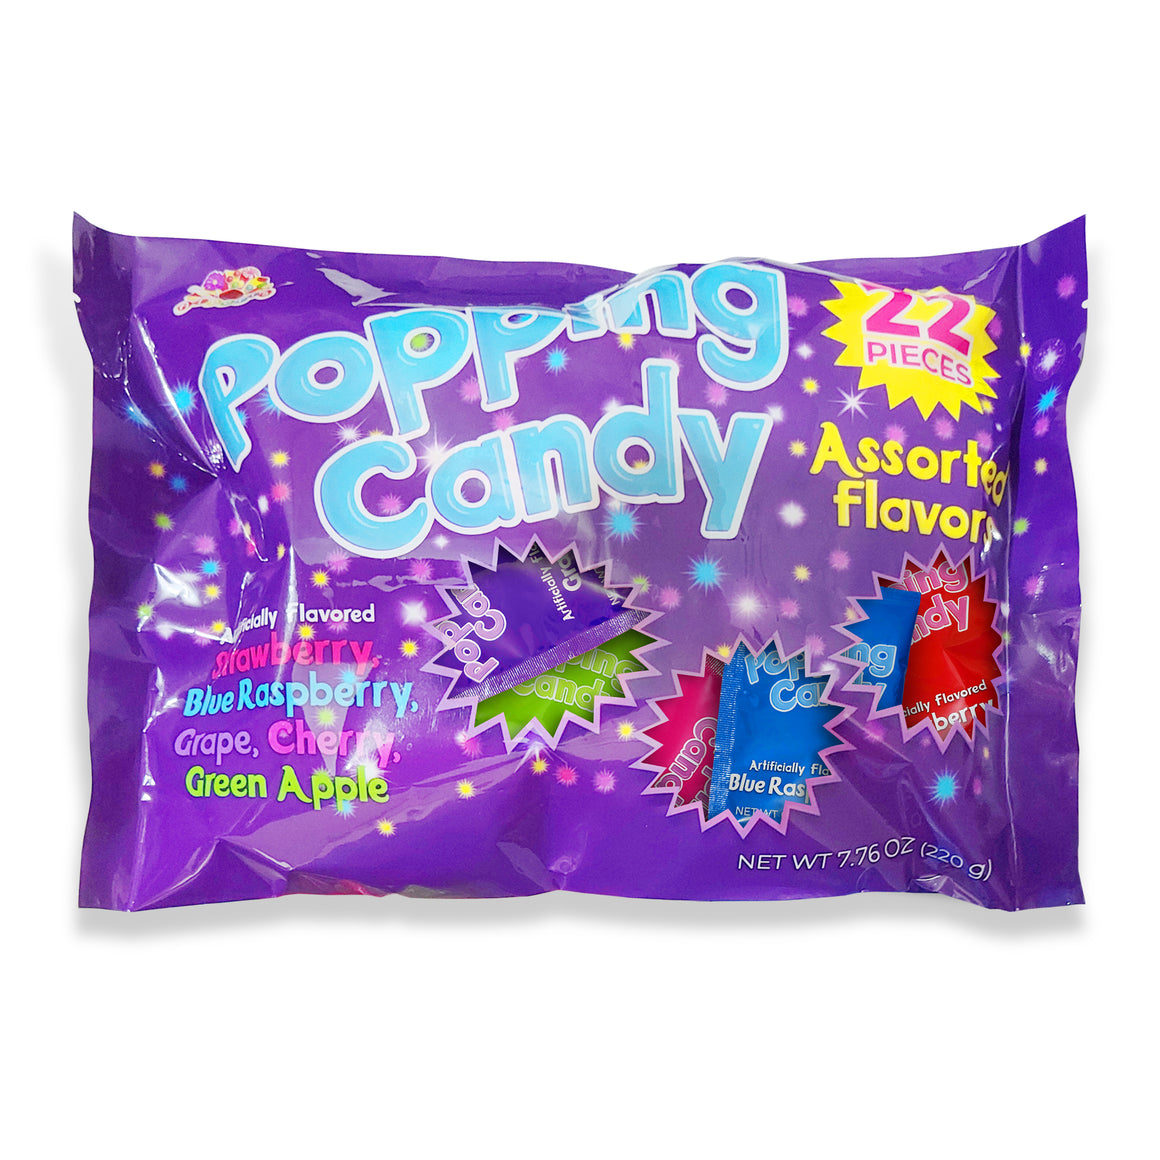 All City Candy Albert's Popping Candy Assorted Flavor 22 Count 7.76 oz. Bag- For fresh candy and great service, visit www.allcitycandy.com